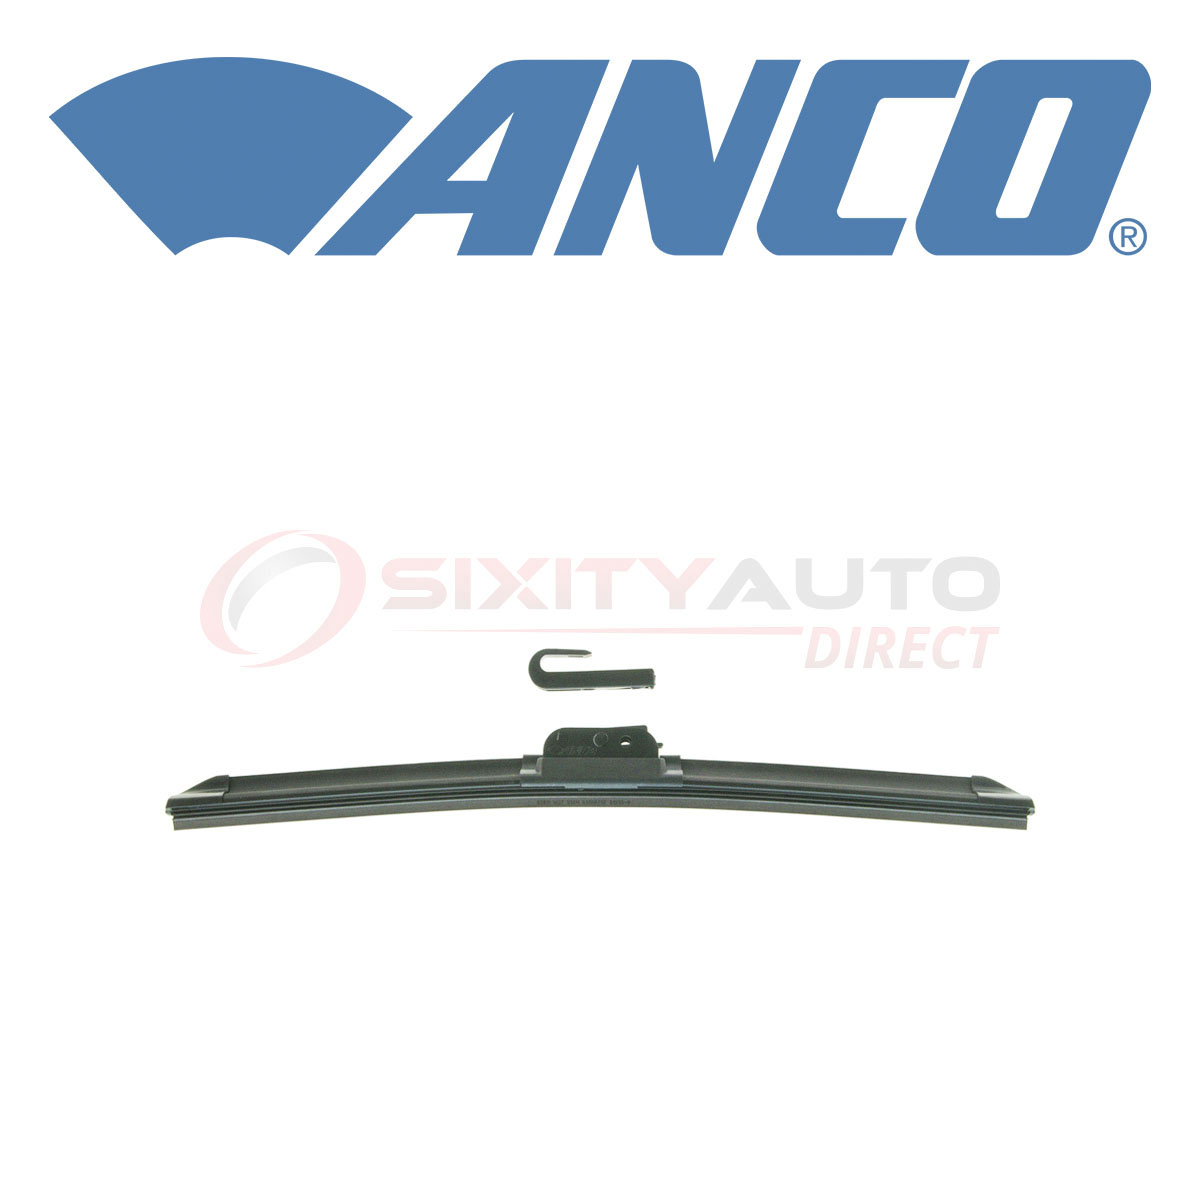 ANCO Countour Windshield Wiper Blade for 2013-2017 Hyundai Santa Fe Sport nz | eBay 2015 Hyundai Santa Fe Sport Windshield Wipers